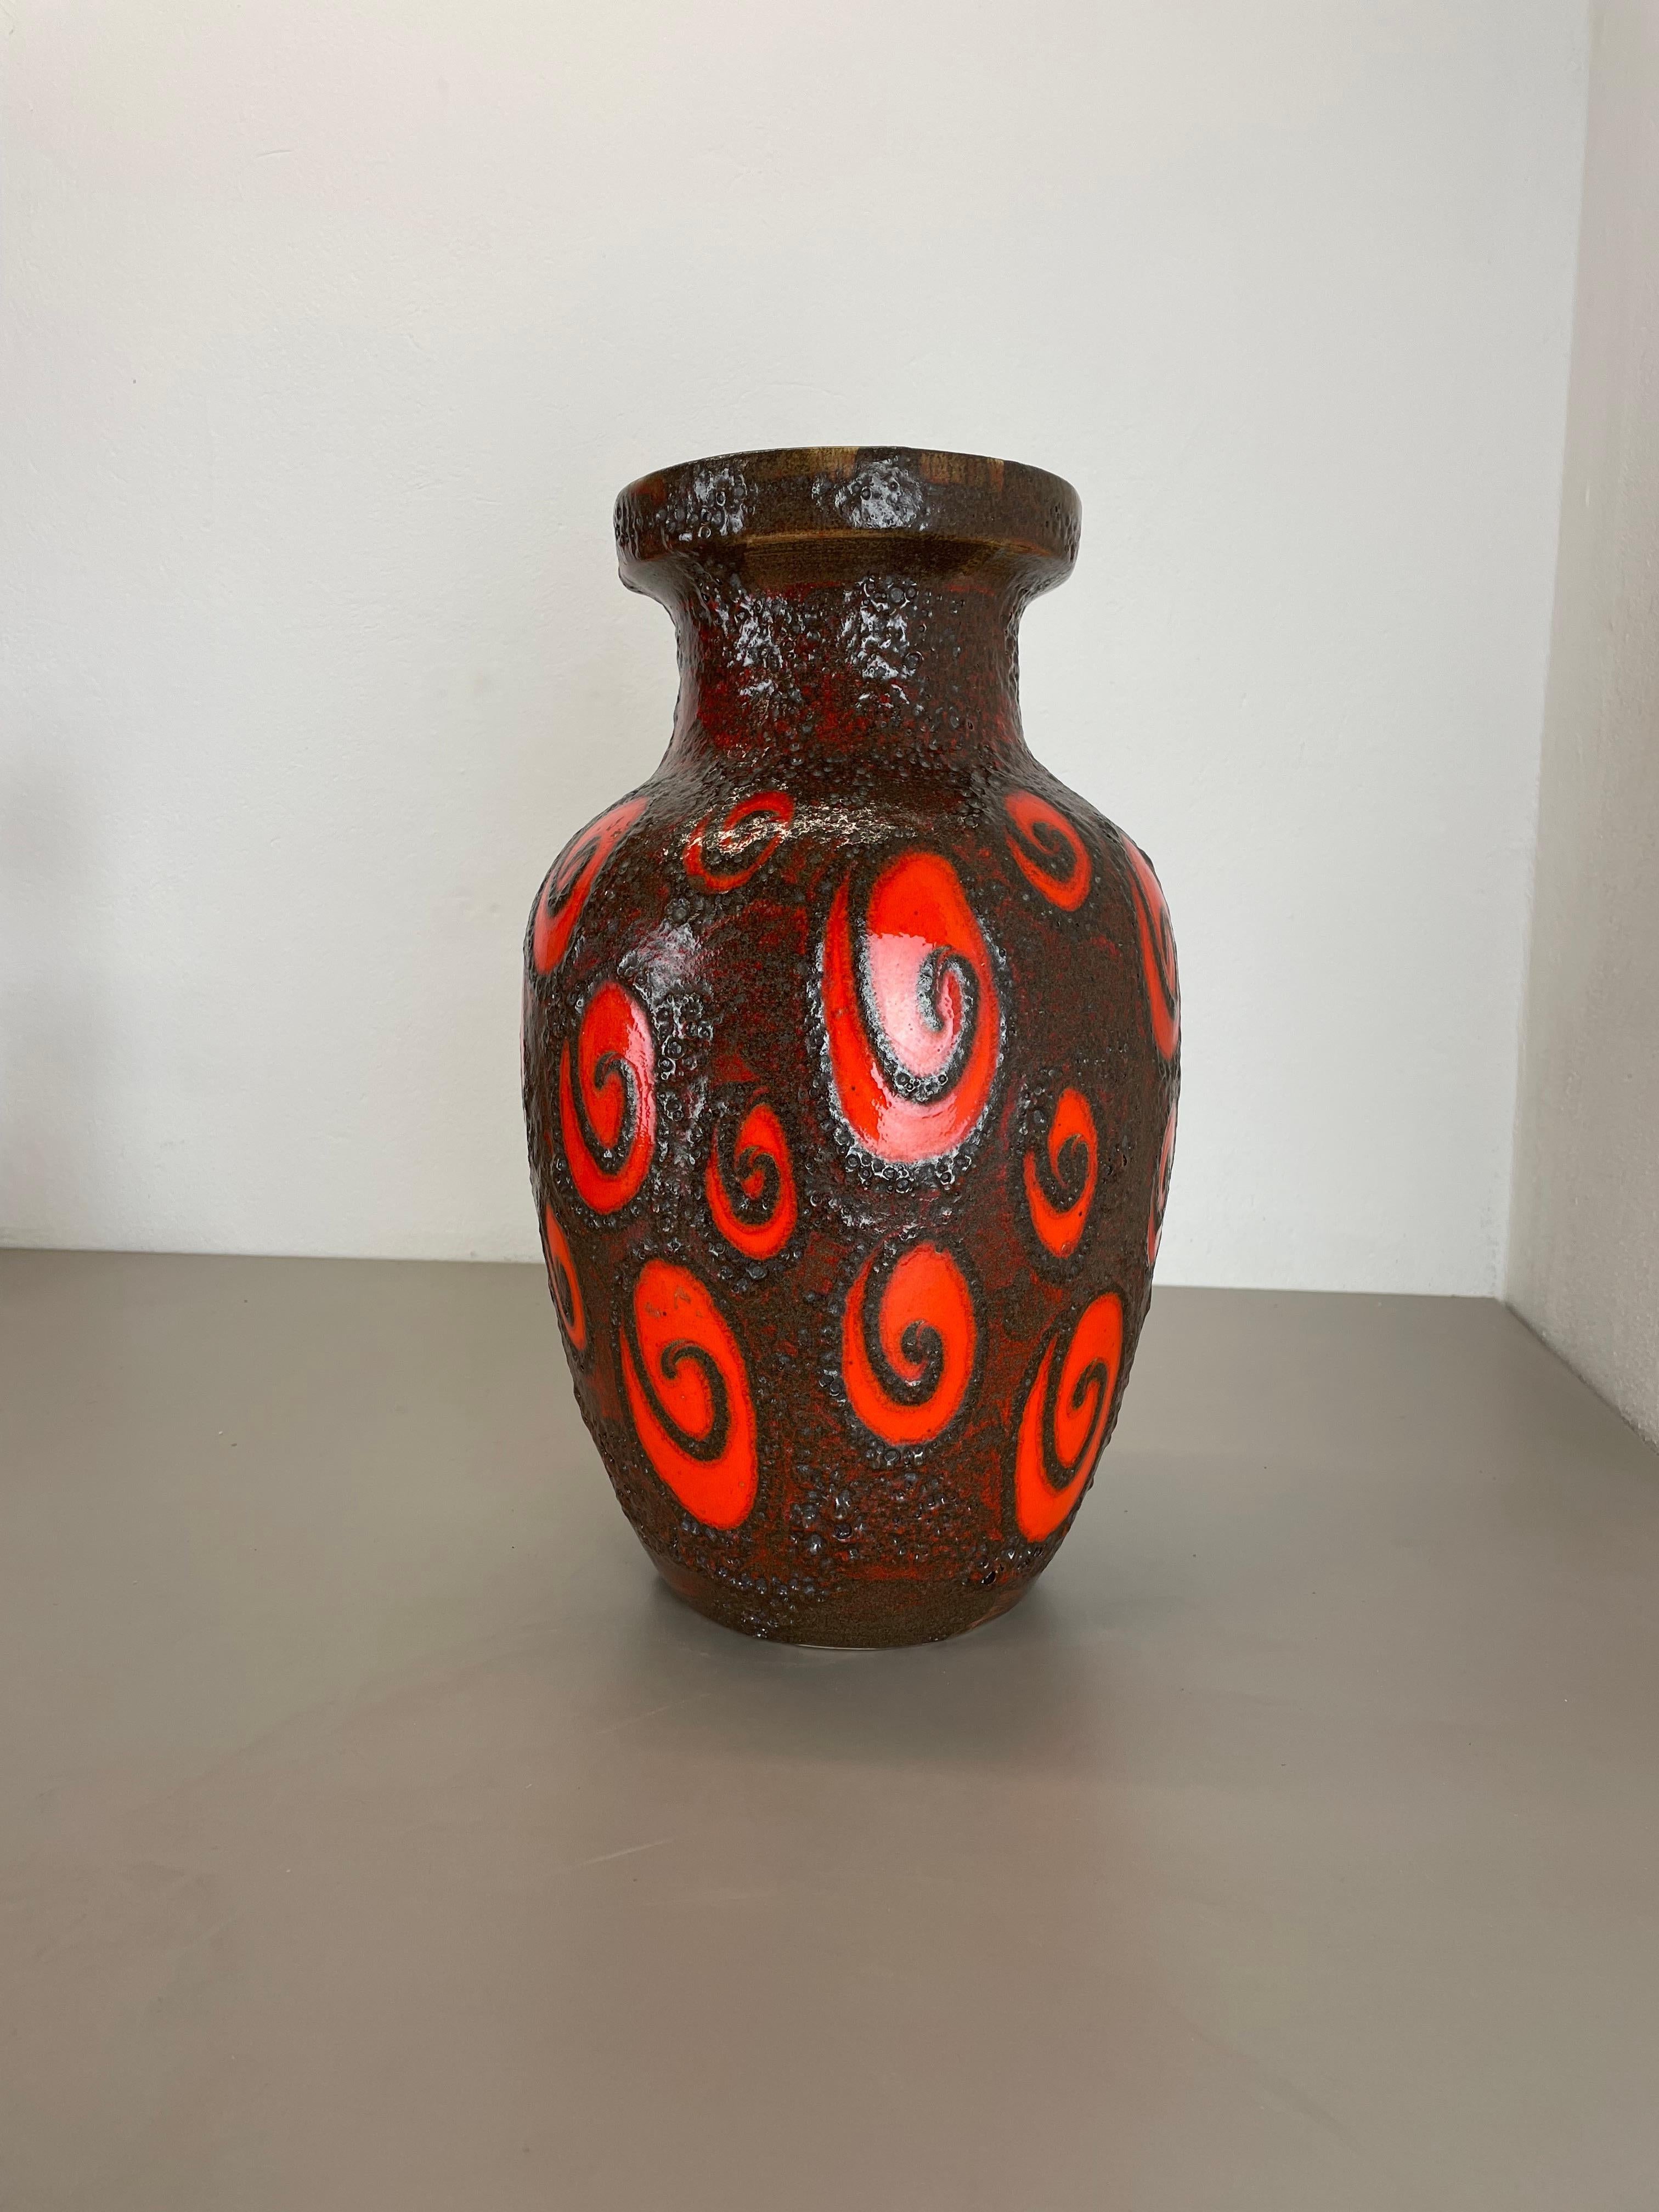 Article:

Fat lava art vase extra large version


Model: 241-47


Producer:

Scheurich, Germany



Decade:

1970s


Description:

This original vintage vase was produced in the 1970s in Germany. It is made of ceramic pottery in fat lava optic with